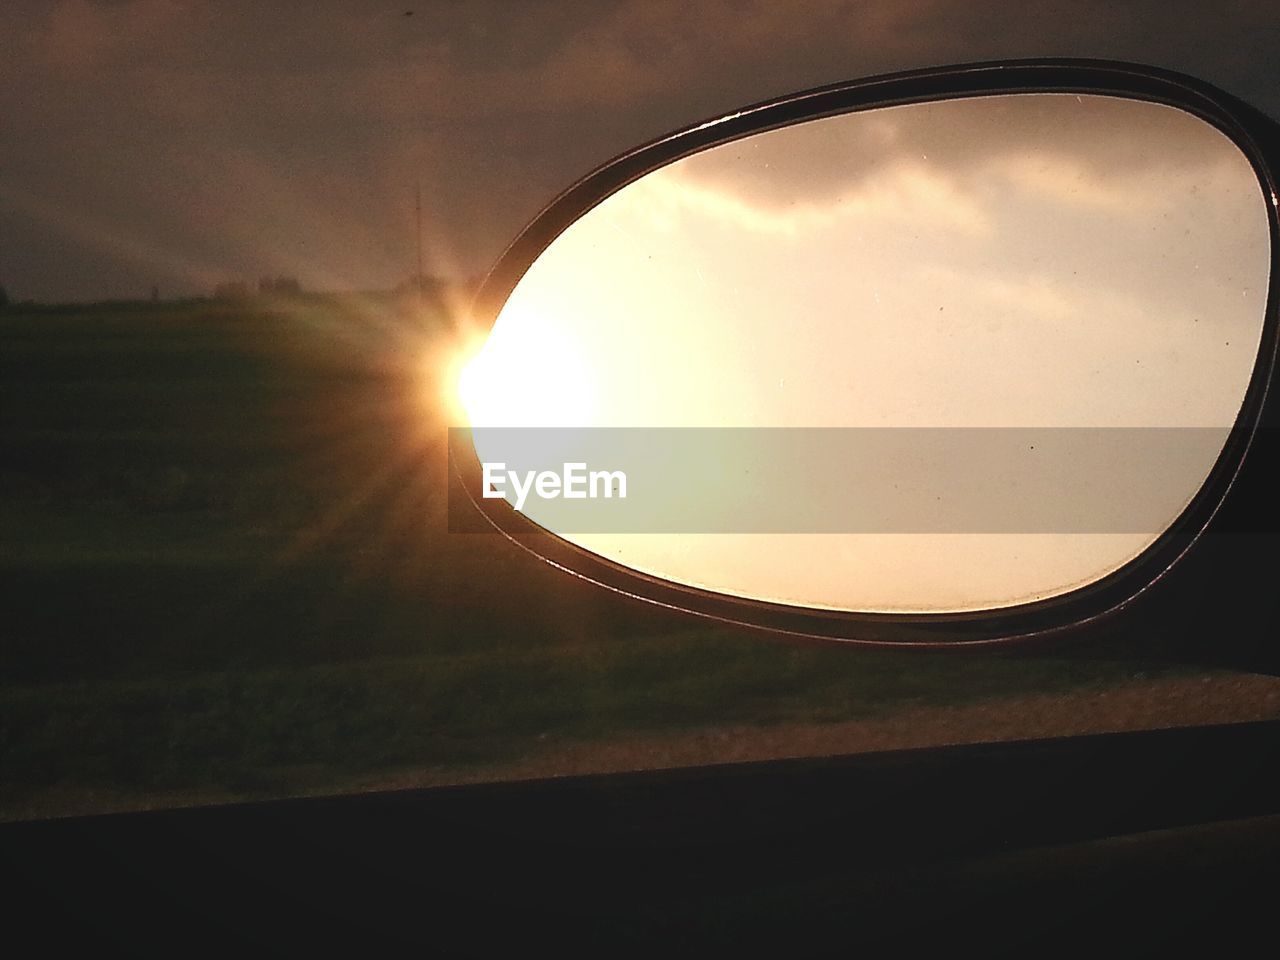 Sky reflecting on car side-view mirror during sunset